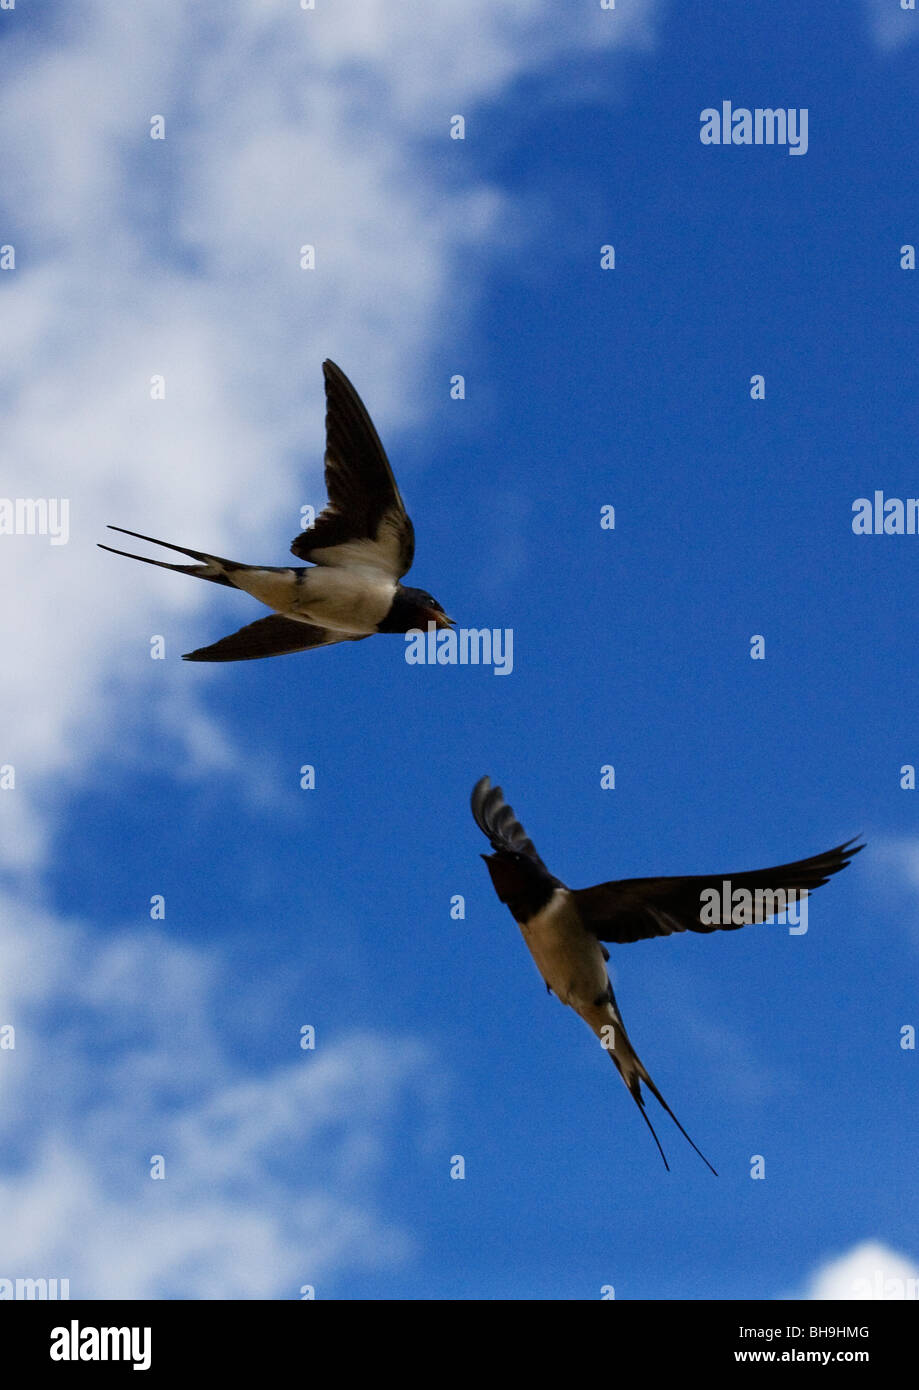 Two Swallows in Flight Stock Photo